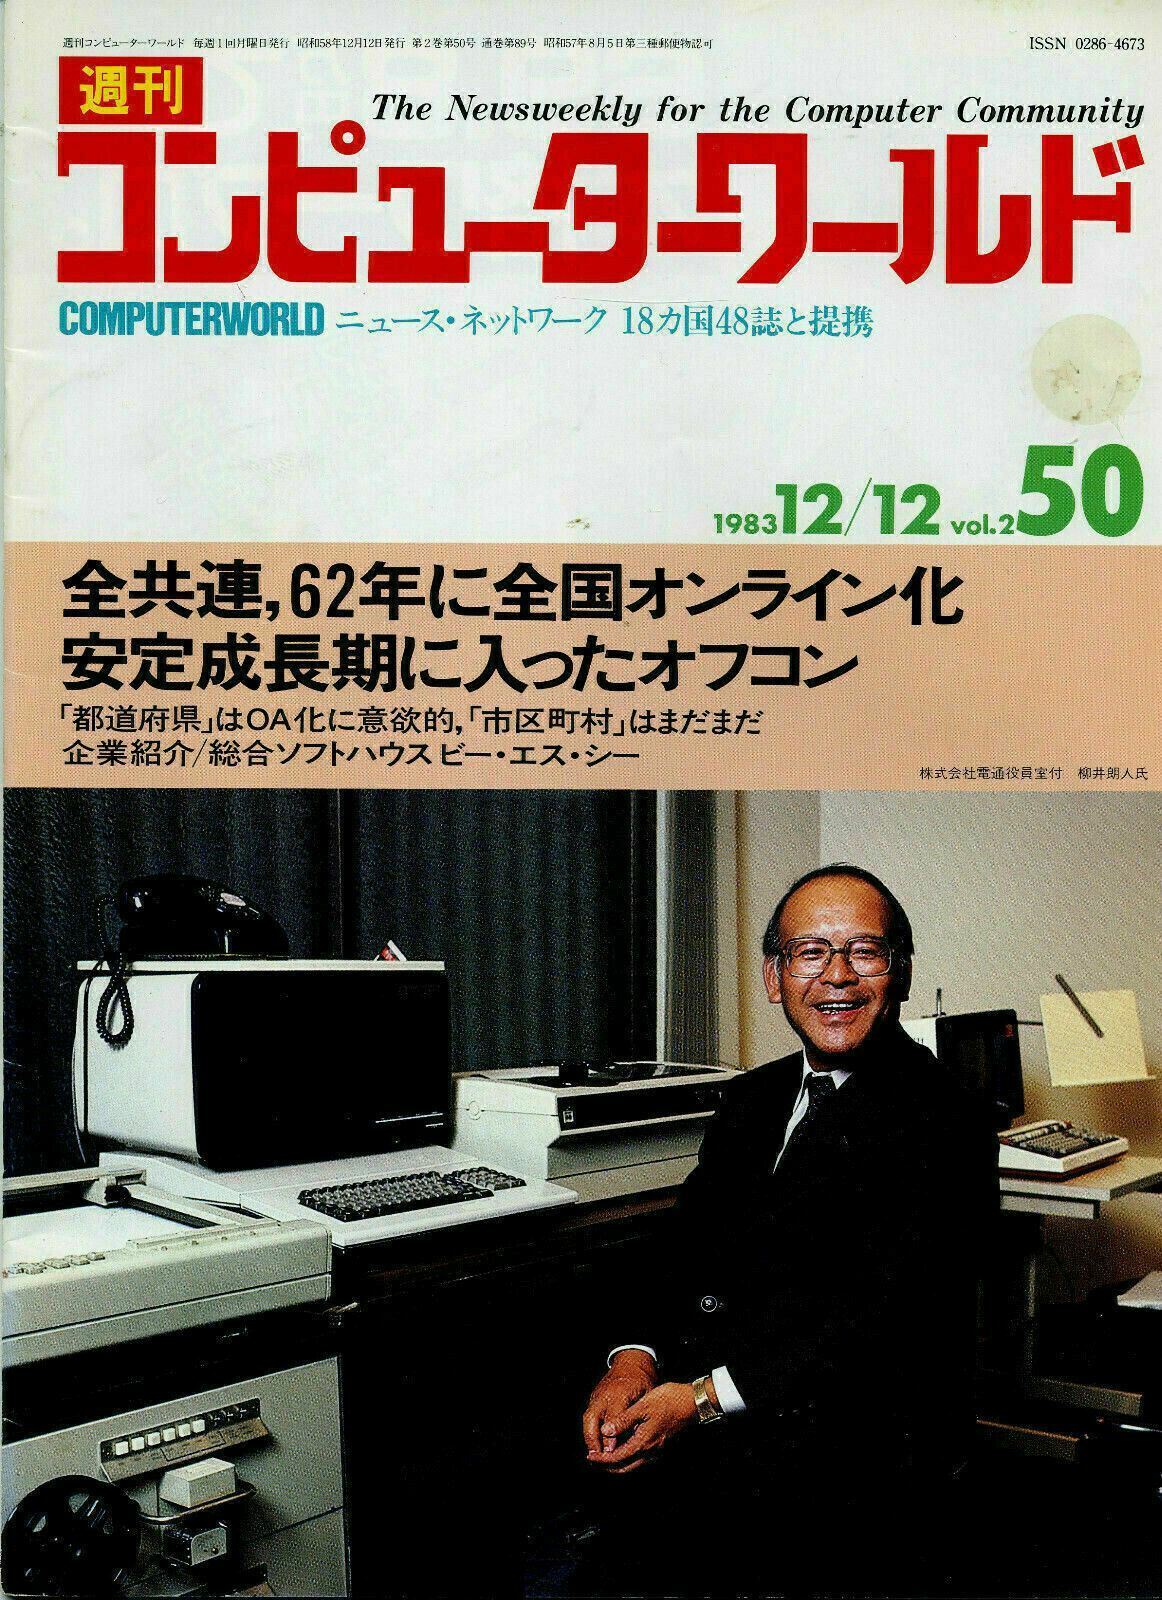 ITHistory Magazines JAPANESE (1980s/90s) (You Pick) Vintage Ads Q